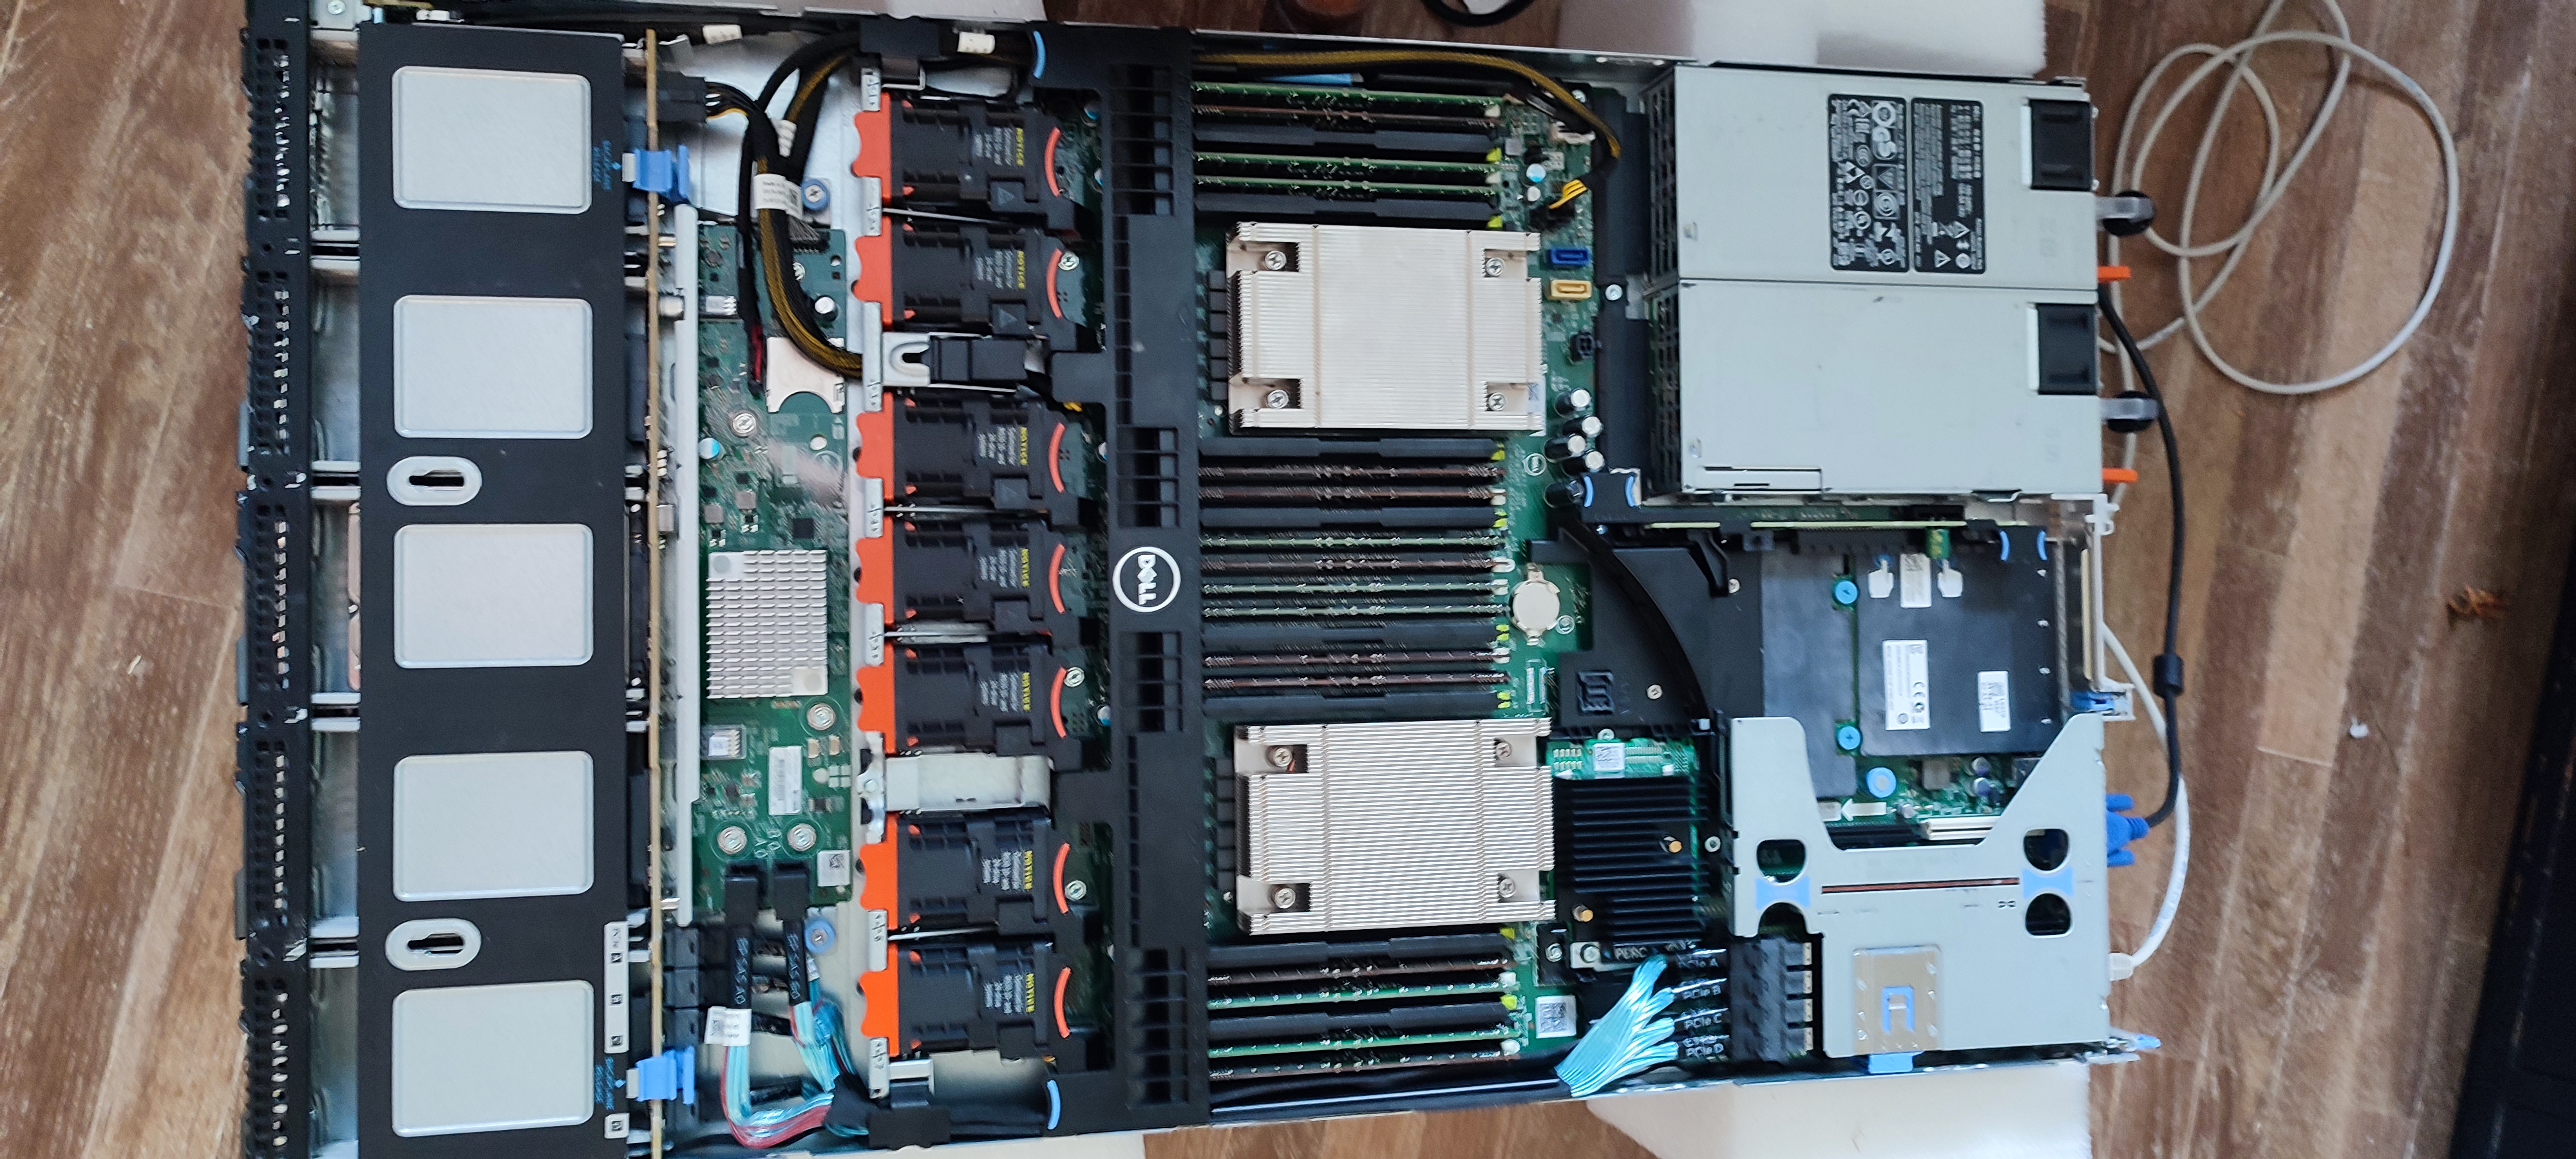 DELL R630 with two CPUs a NVME expander and a PERC card